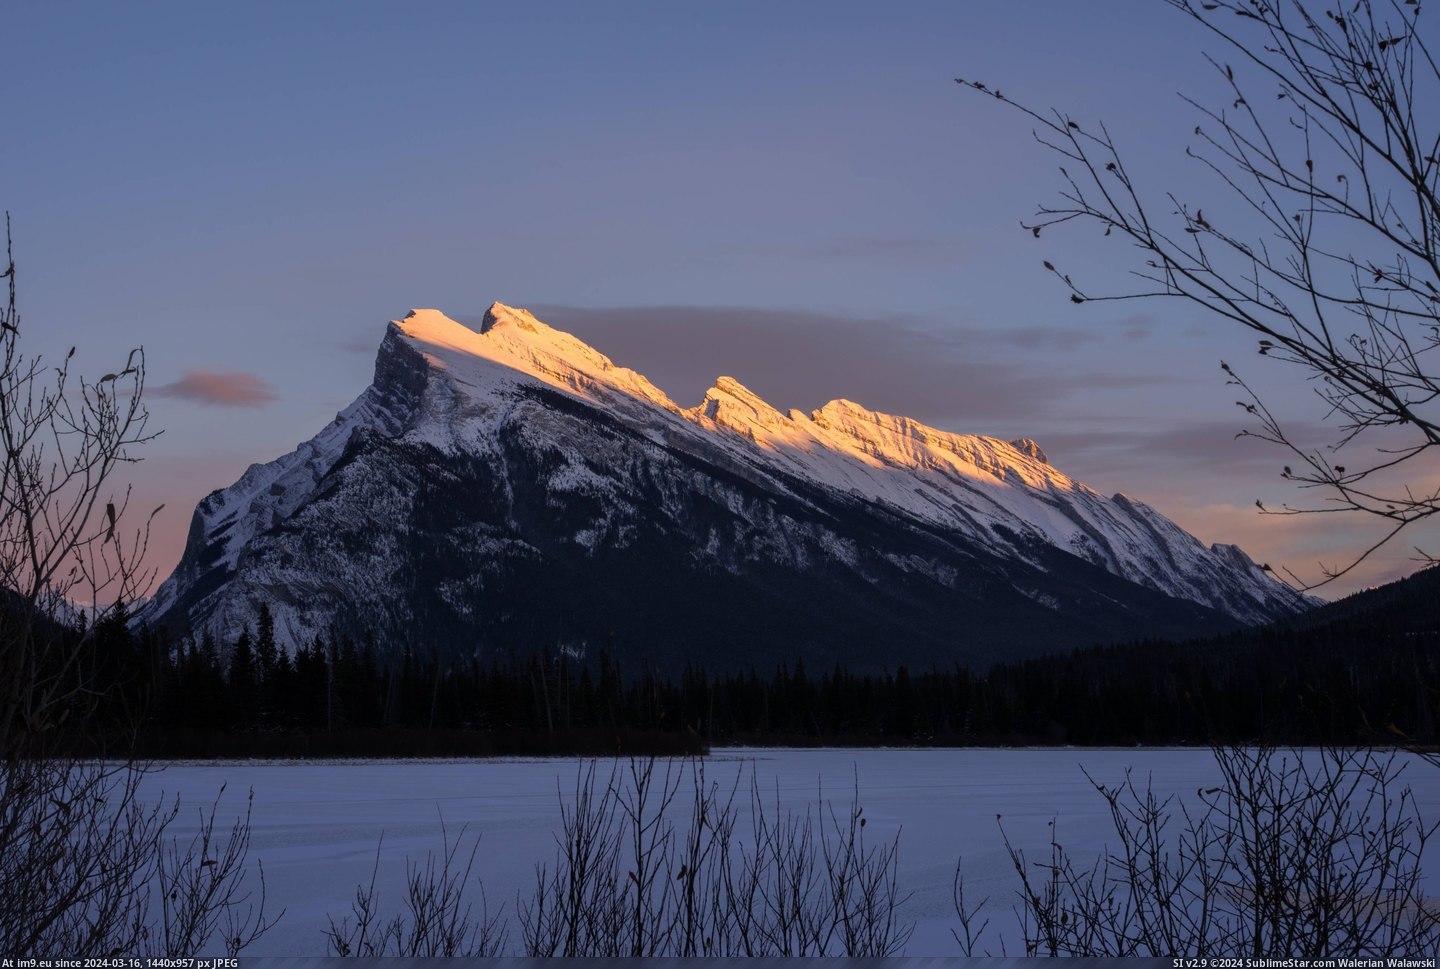 #Sunset #Canada #15th #Rundle #Alberta #November [Earthporn] Mt. Rundle, Alberta, Canada. Sunset of November 15th, 2014 [OC] [3870x2583] Pic. (Image of album My r/EARTHPORN favs))